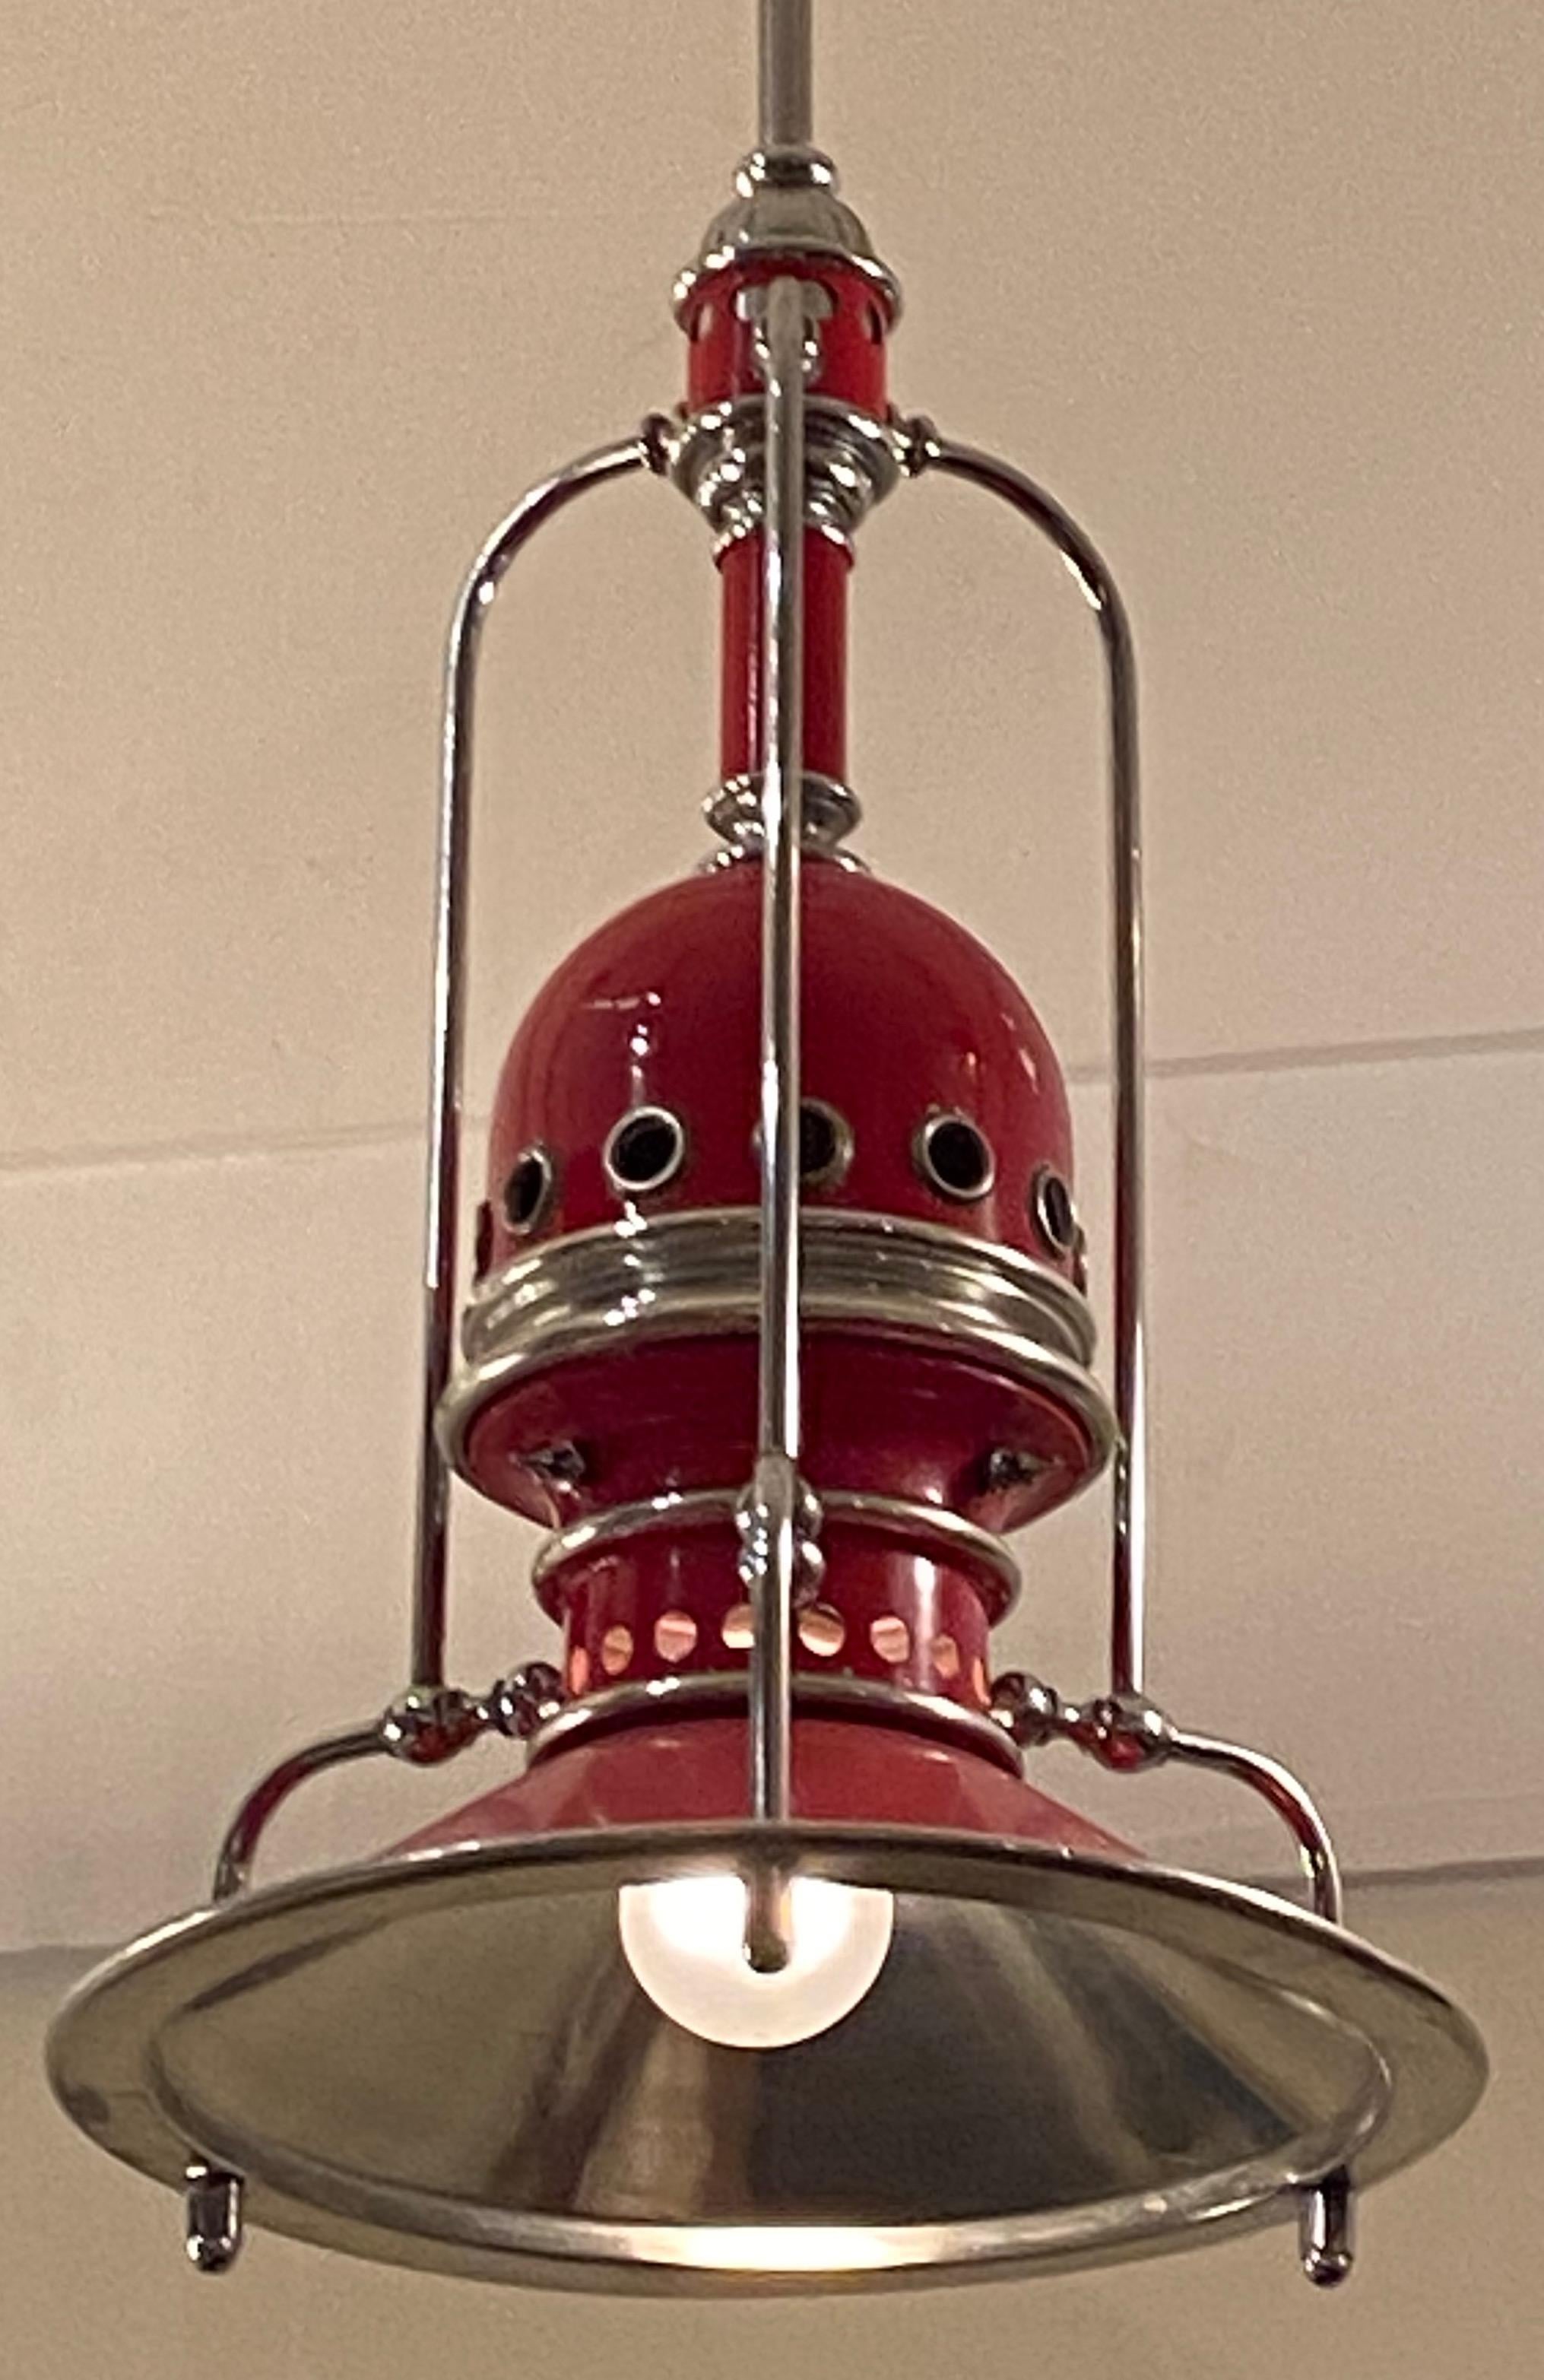 I bought this fixture in Europe over 14 years ago. It is a unique design: industrial, streamline, and modern (steampunk) all wrapped together. I have not seen much lighting like this, certainly not something you see often. When I bought it, I was